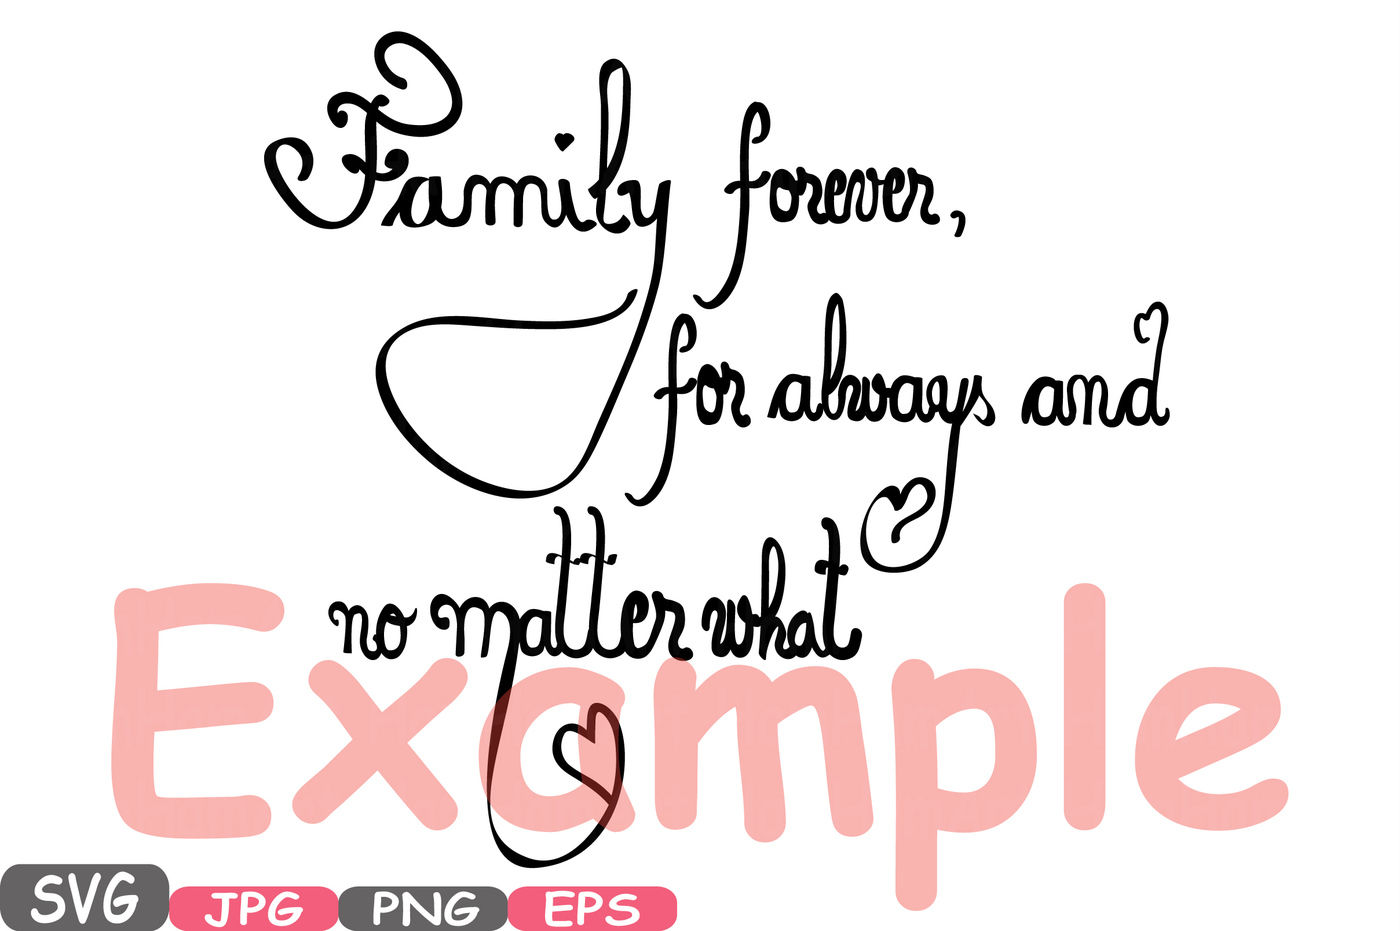 Download Family Forever SVG Word Art family quote clip art ...